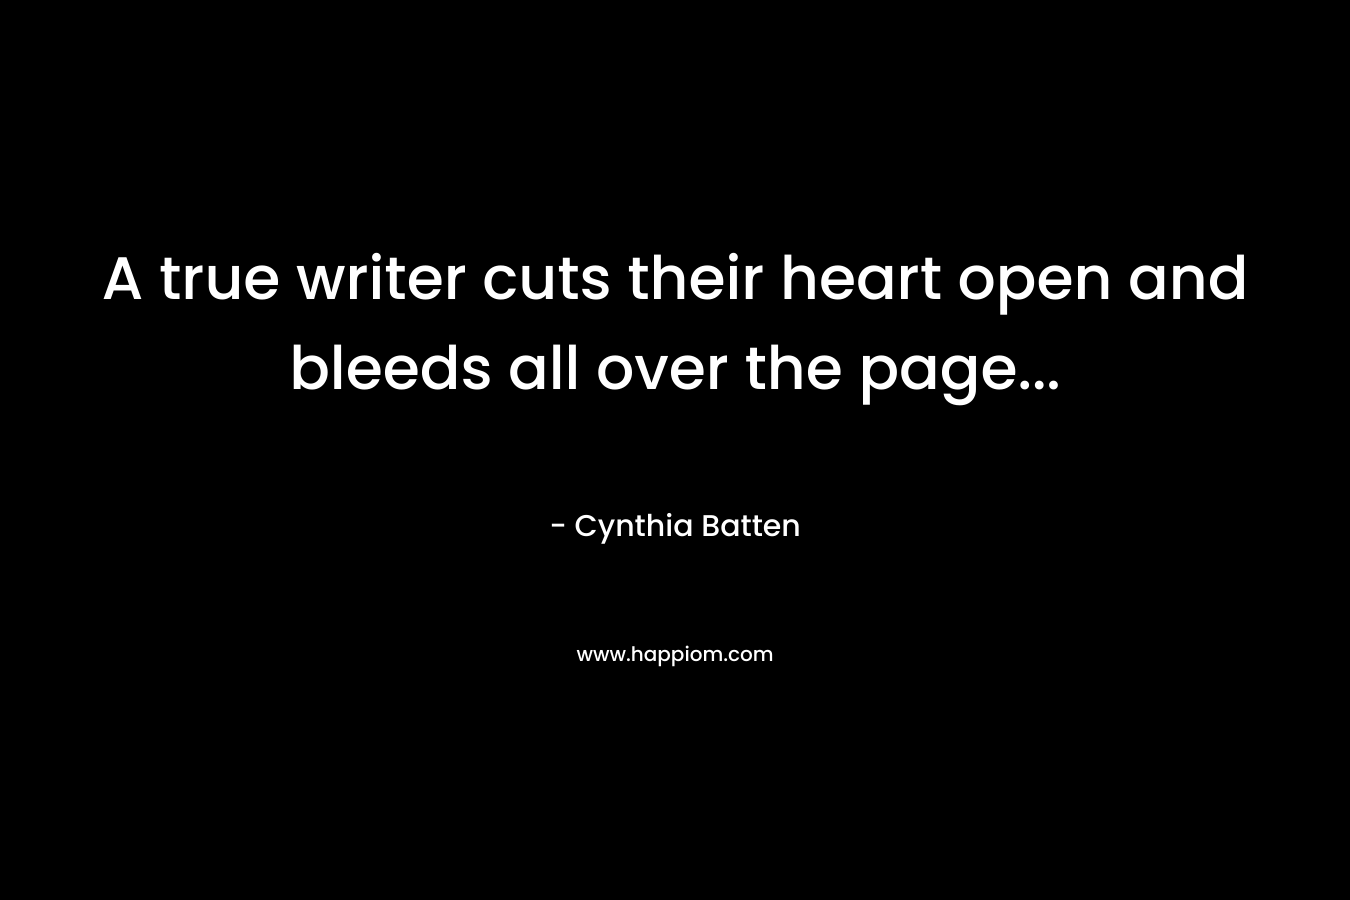 A true writer cuts their heart open and bleeds all over the page… – Cynthia Batten